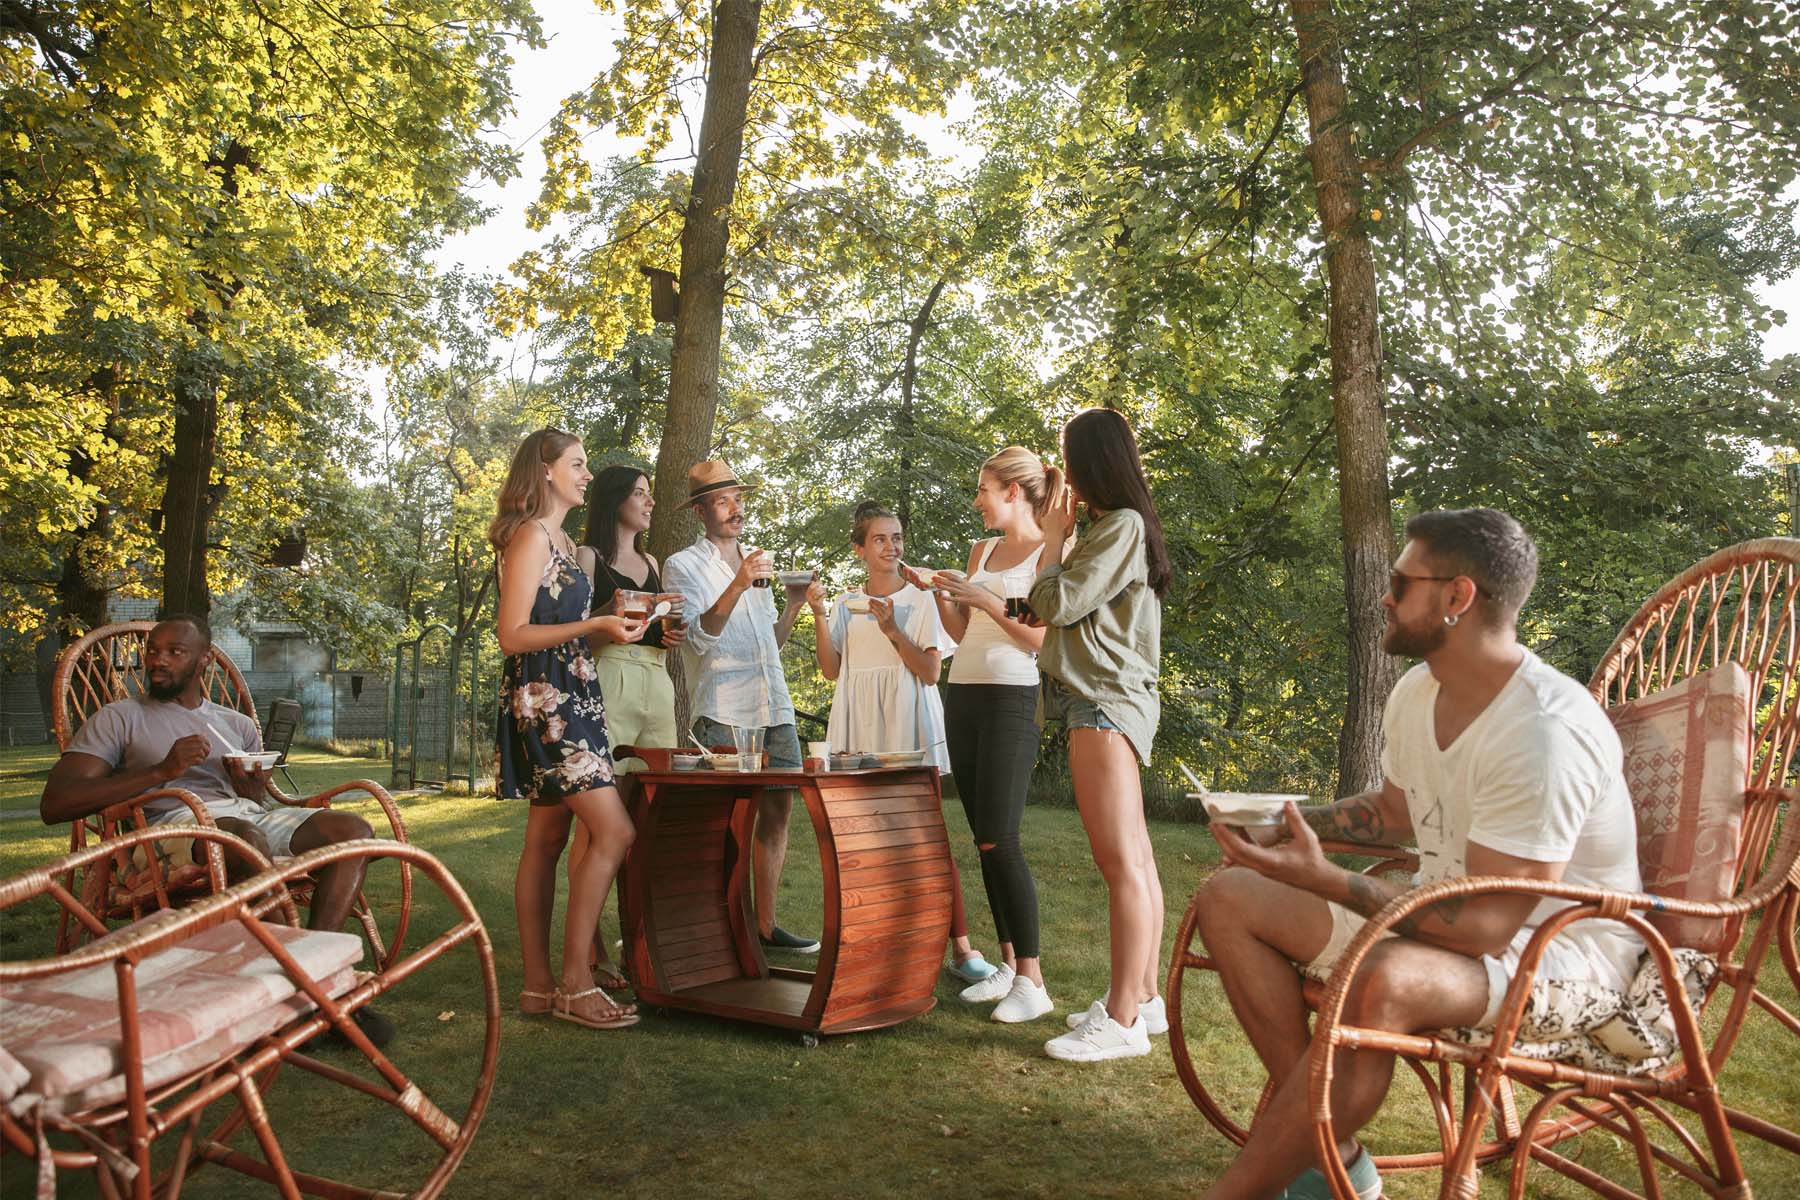 A Group Of People Enjoying A Community Outdoor Space